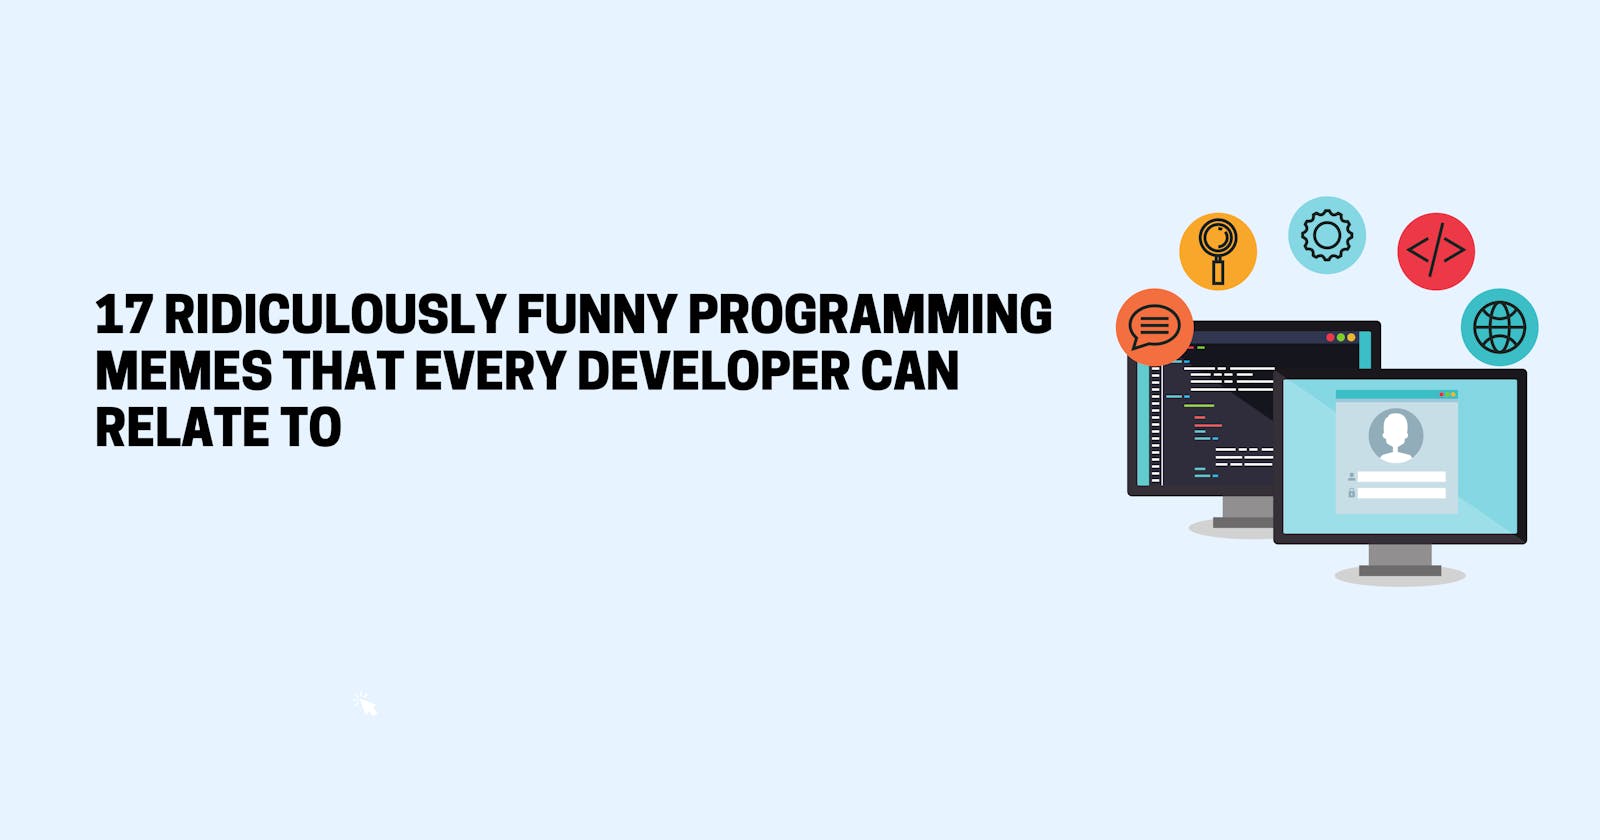 17 Ridiculously Funny Programming Memes that Every Developer Can Relate To